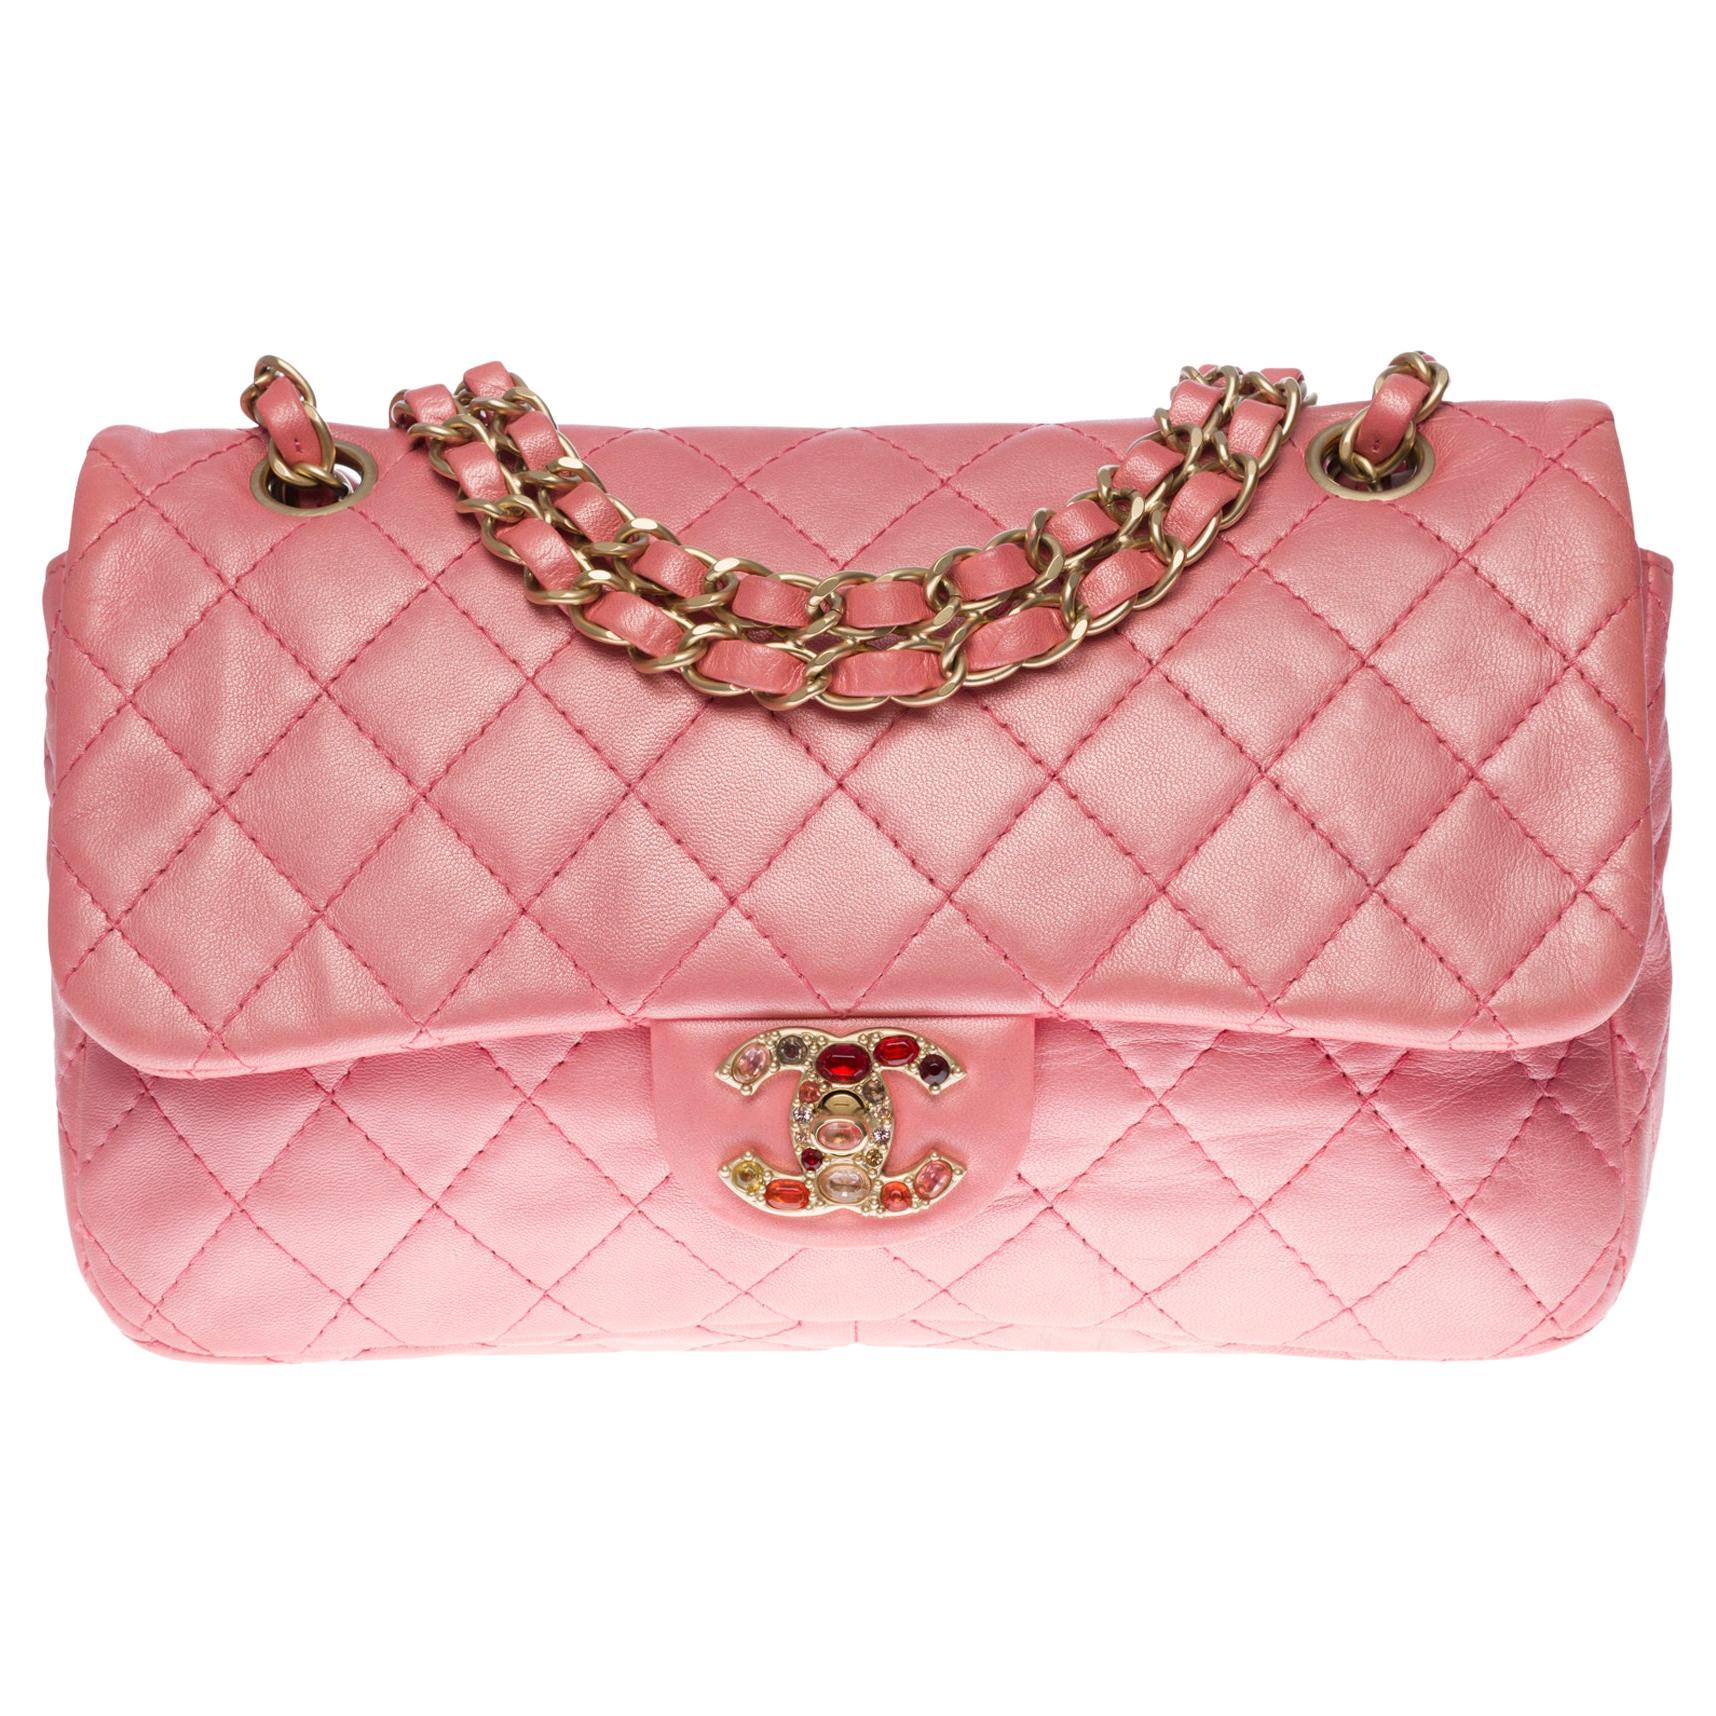 Limited edition Chanel Classic shoulder bag in metallic Pink quilted leather, GHW